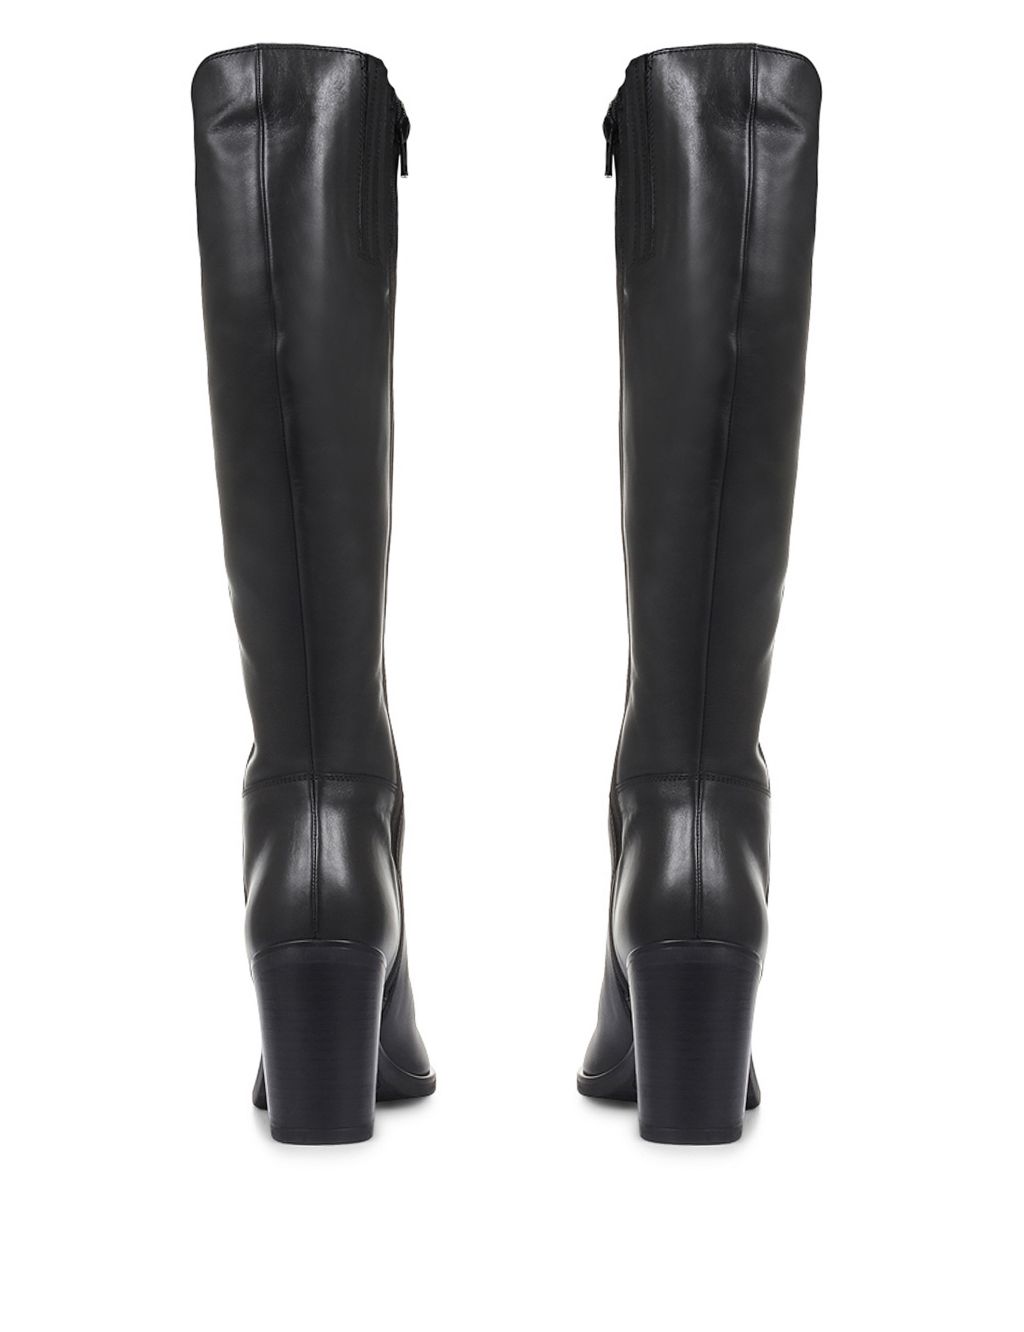 Slim Calf Leather Block Heel Pointed Knee High Boots image 3